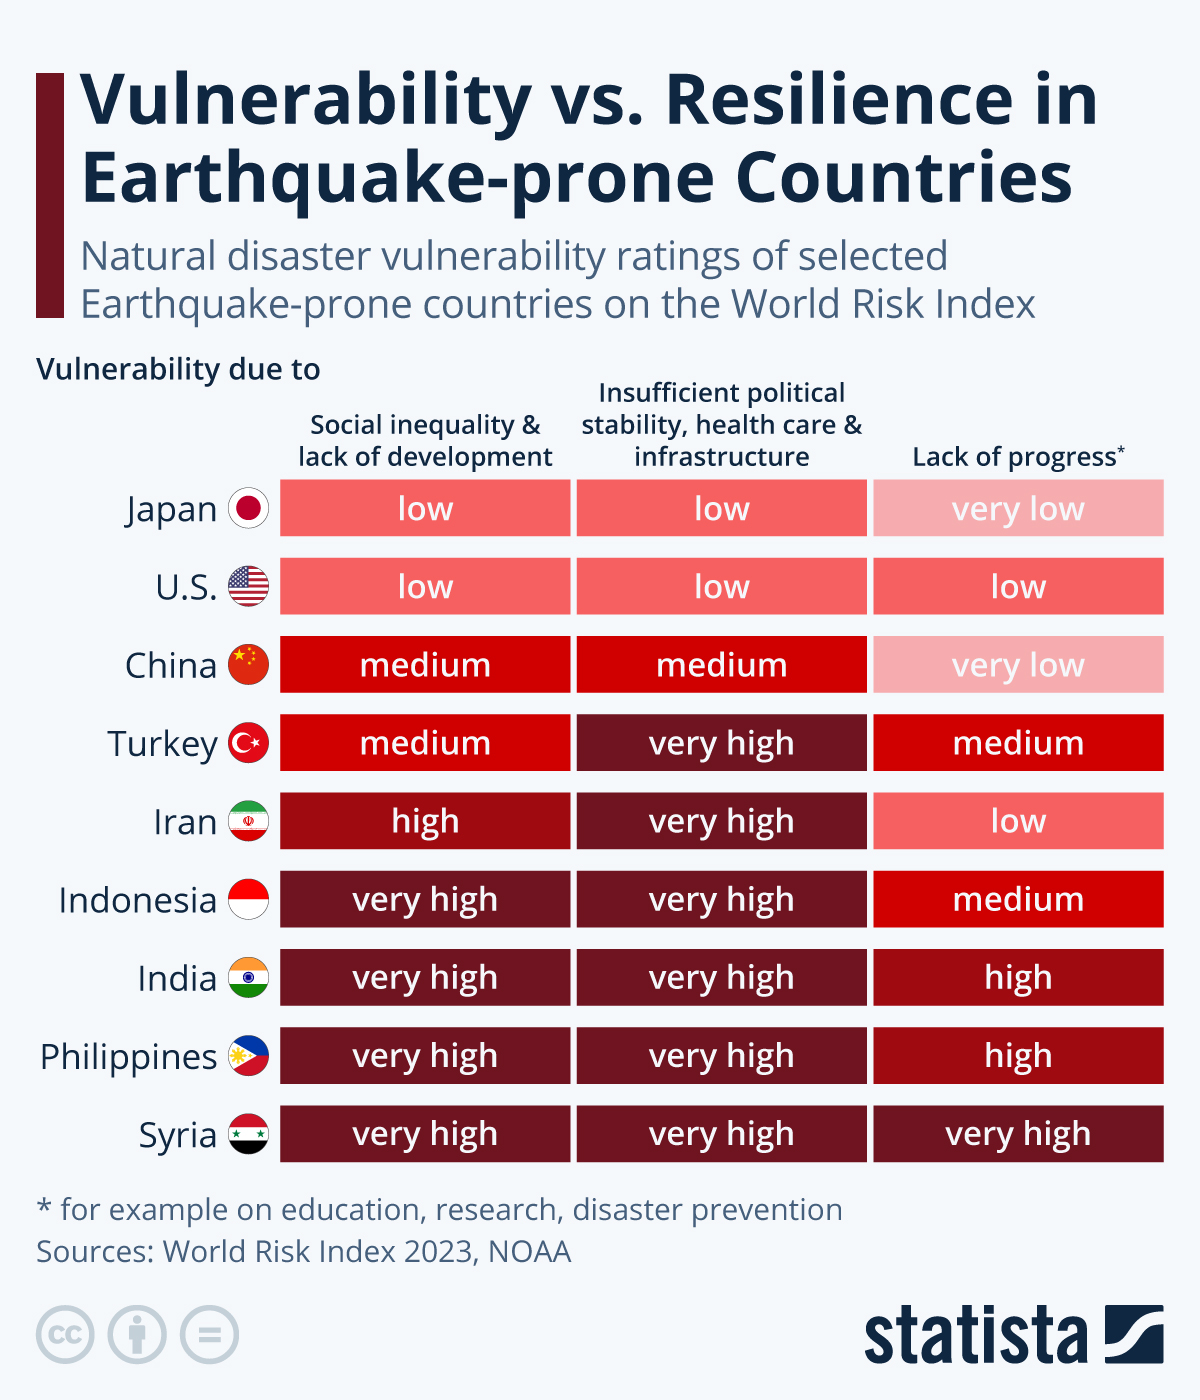 Earthquakes Prone Countries Comparison of Vulnerability and Resilience